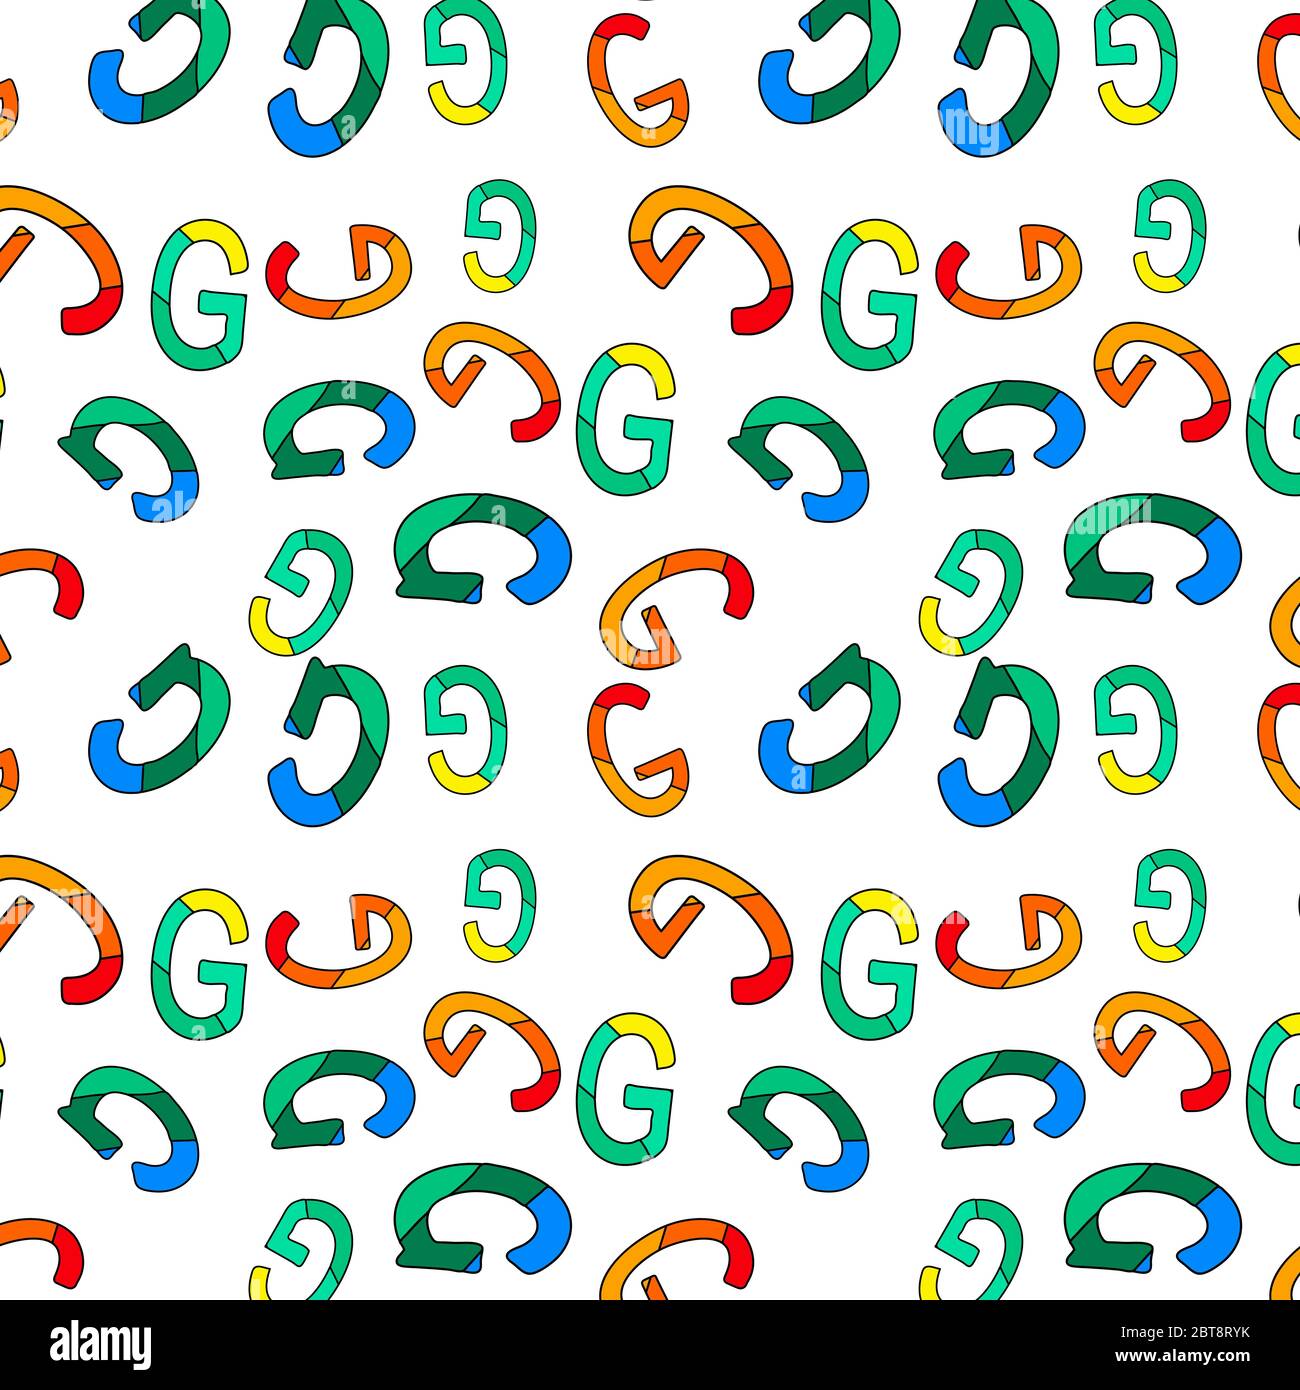 Letters G - seamless pattern. Randomly G letters of green, blue, yellow, red, orange shades. G is the seventh letter of the basic Latin alphabet. Stock Vector